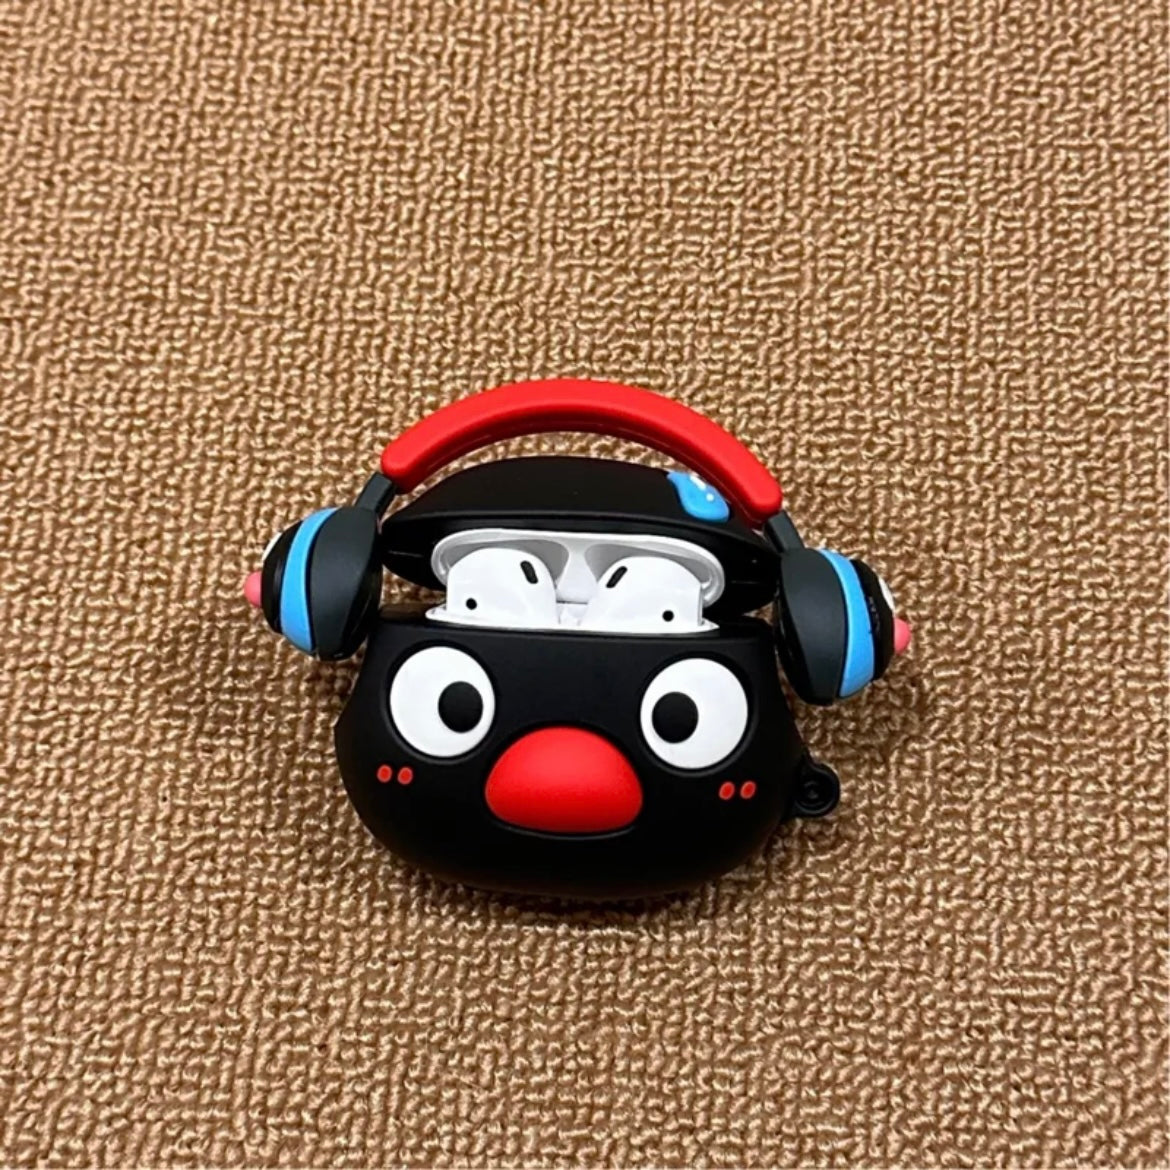 Black Penguin-Shaped AirPods Silicone Earphone Protective Case